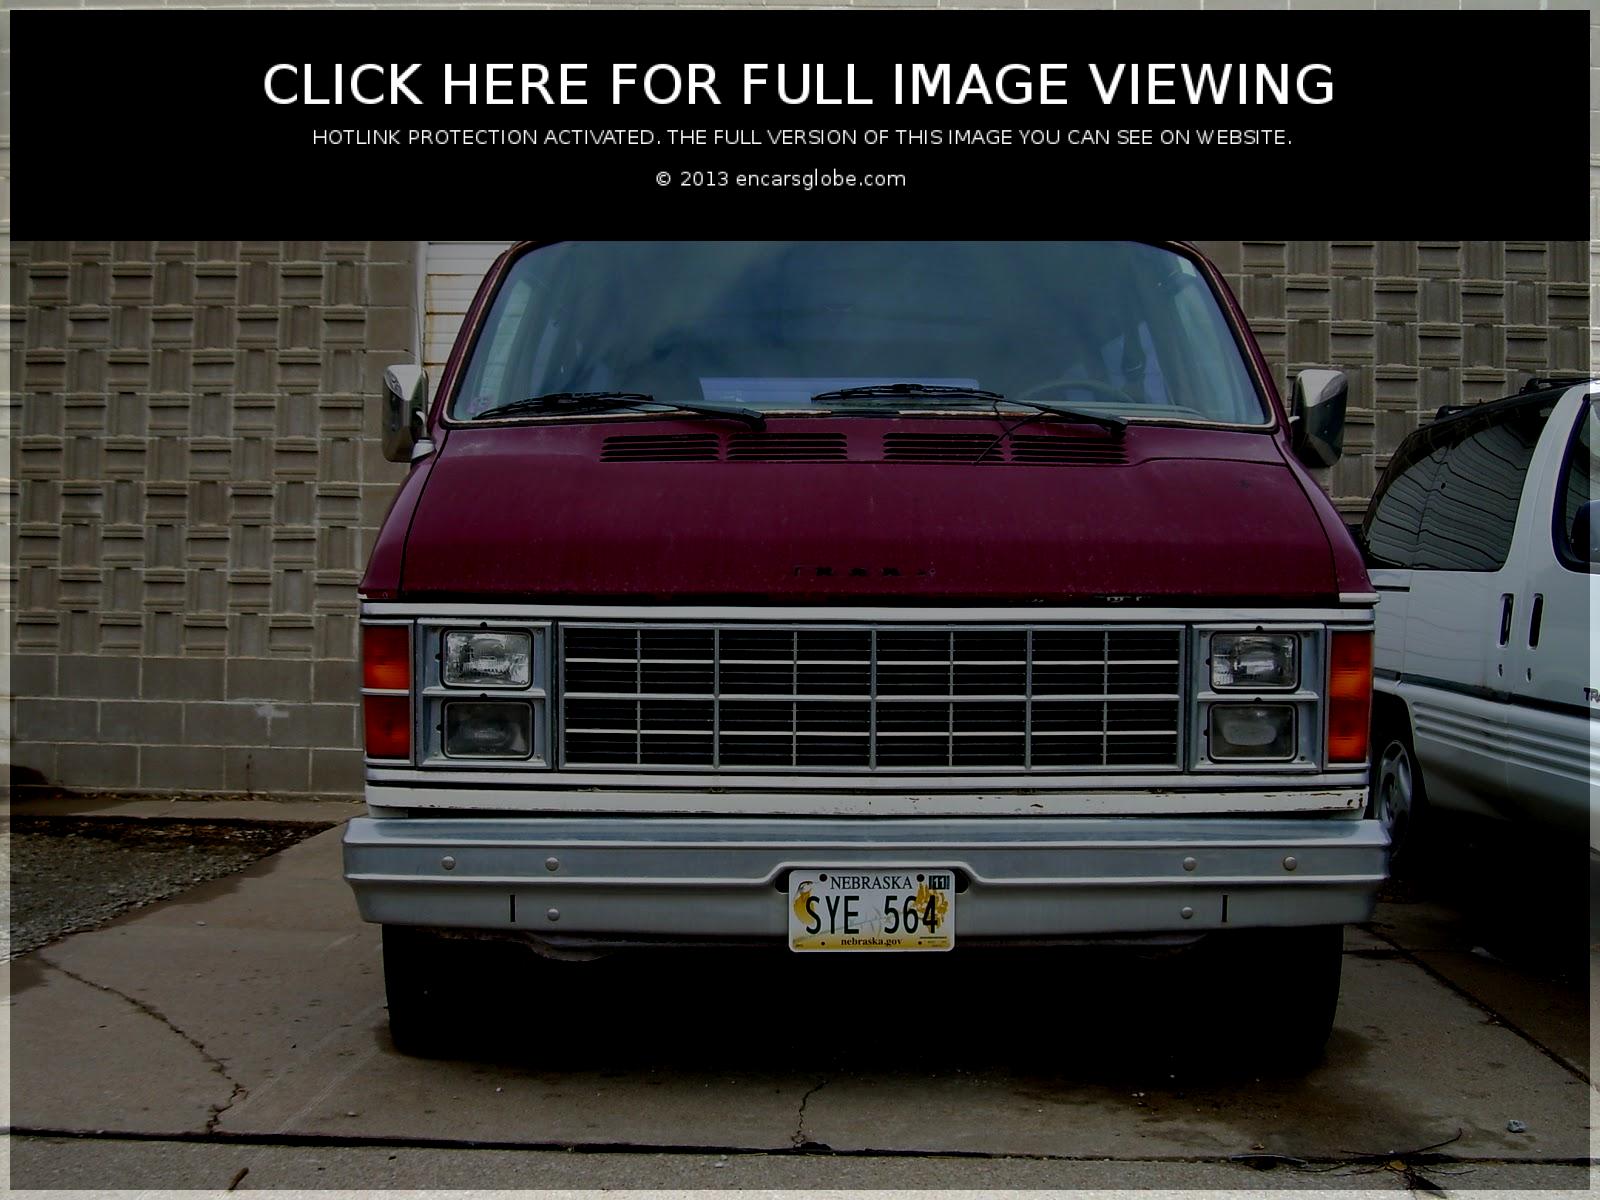 Dodge Ram 150 Regal Photo Gallery: Photo #01 out of 11, Image Size ...